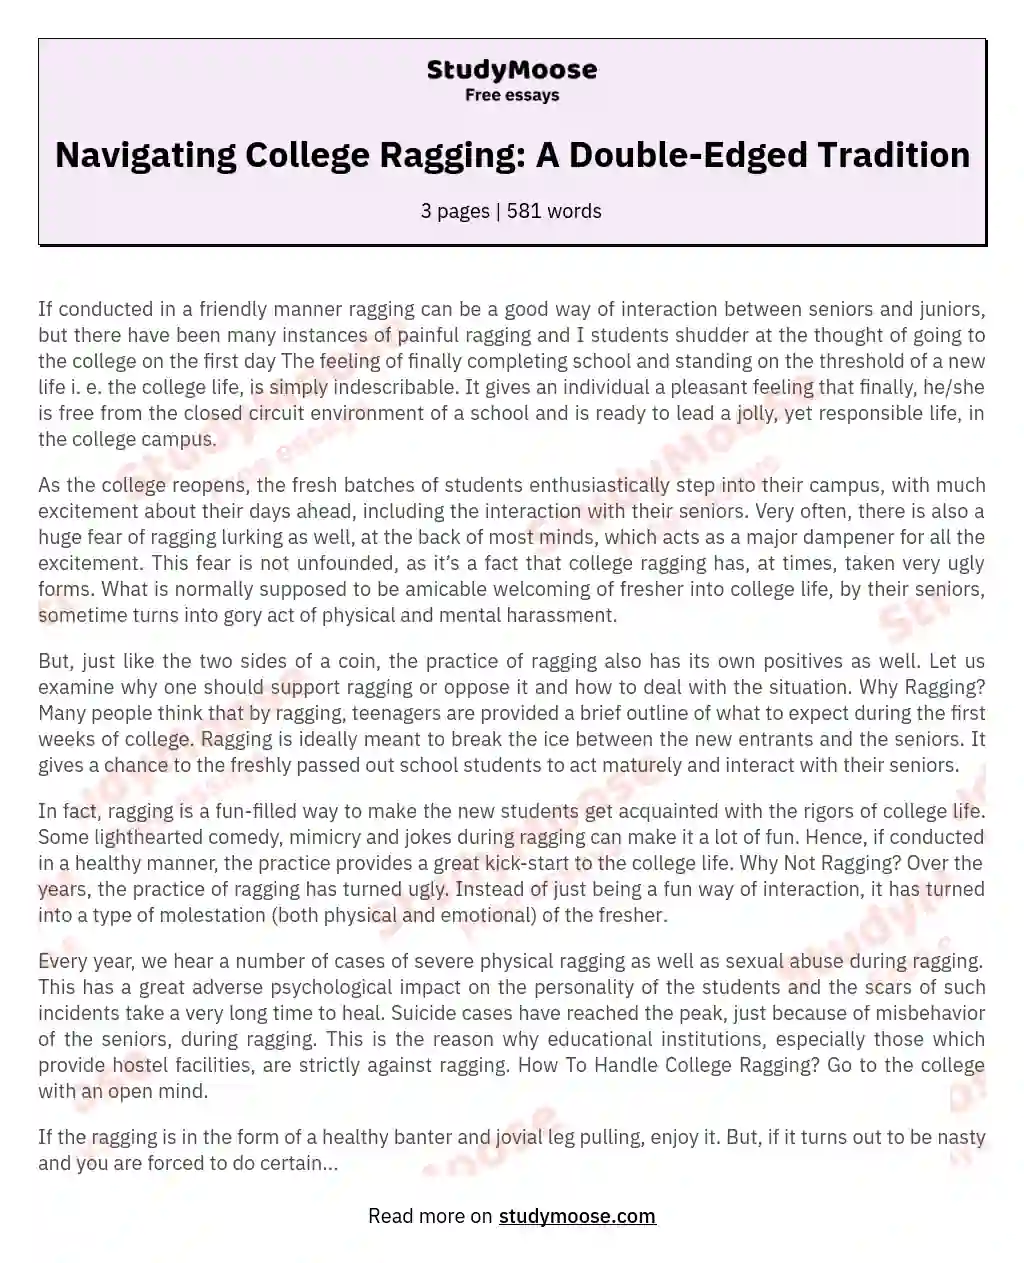 Navigating College Ragging: A Double-Edged Tradition essay